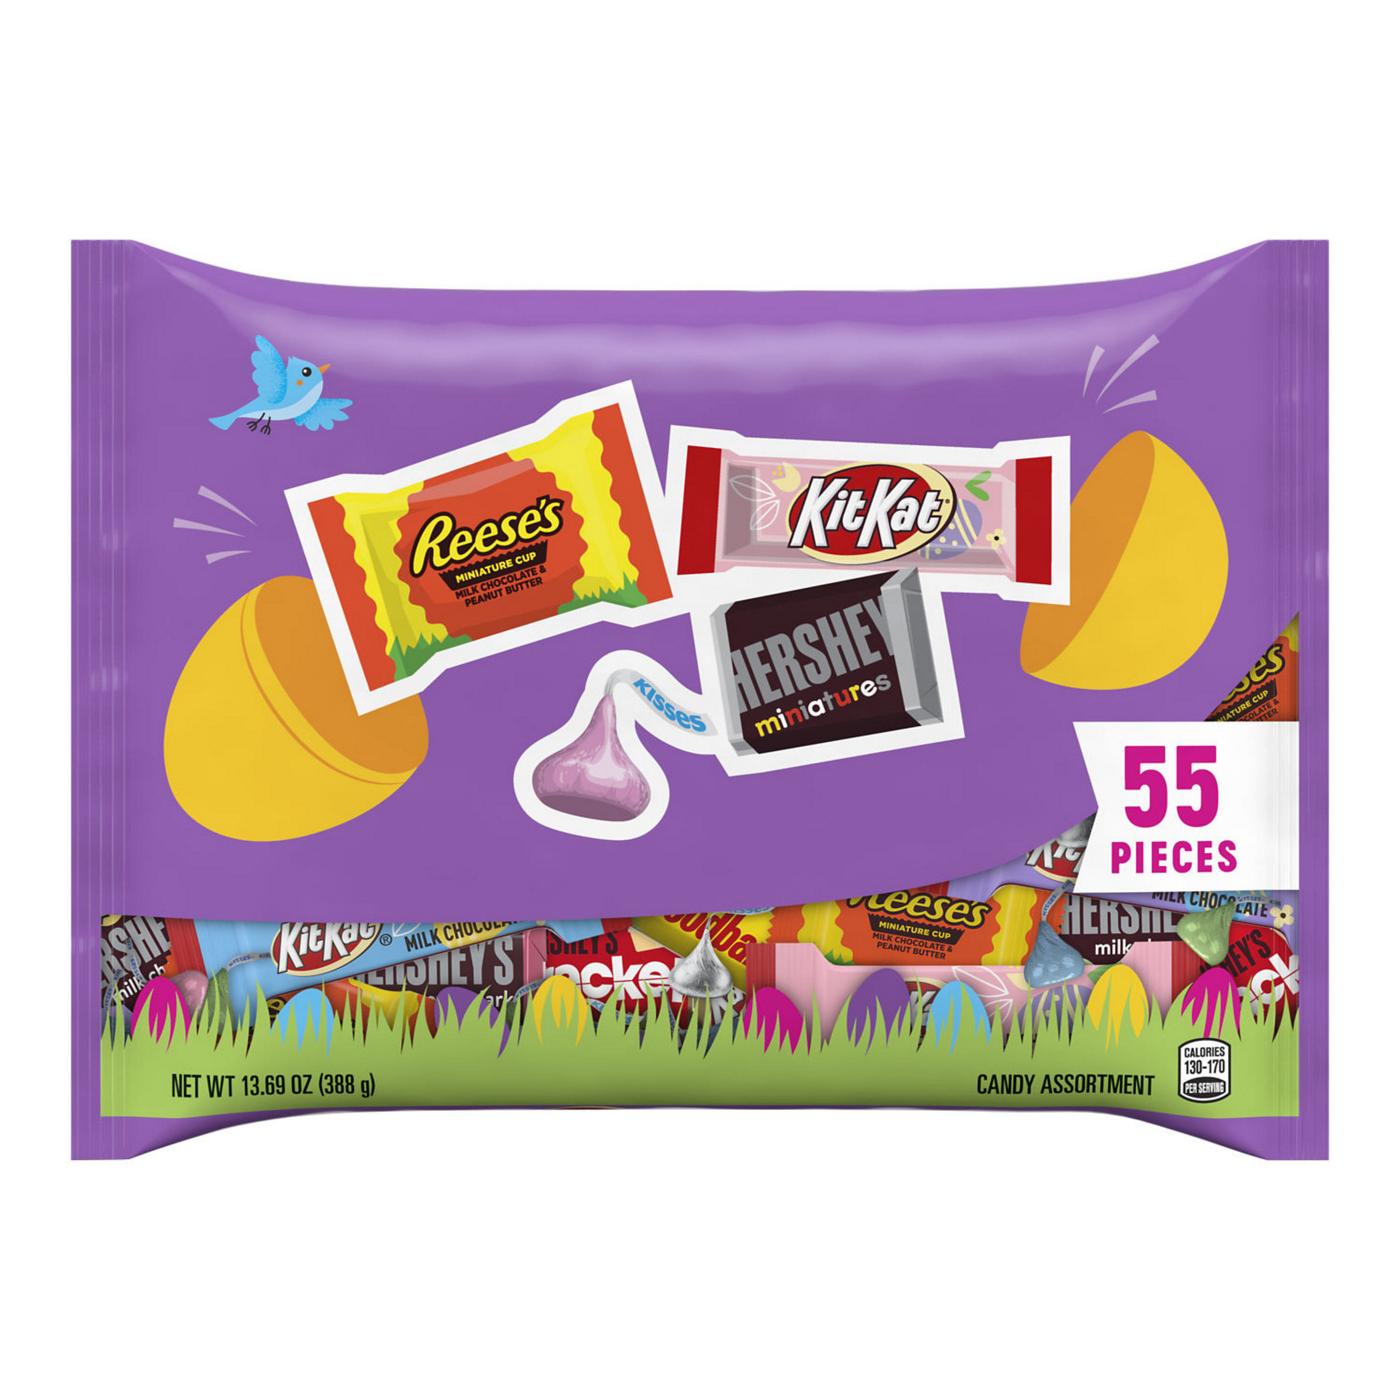 Hershey's, Reese's & Kit Kat Assorted Chocolate Easter Candy; image 1 of 3